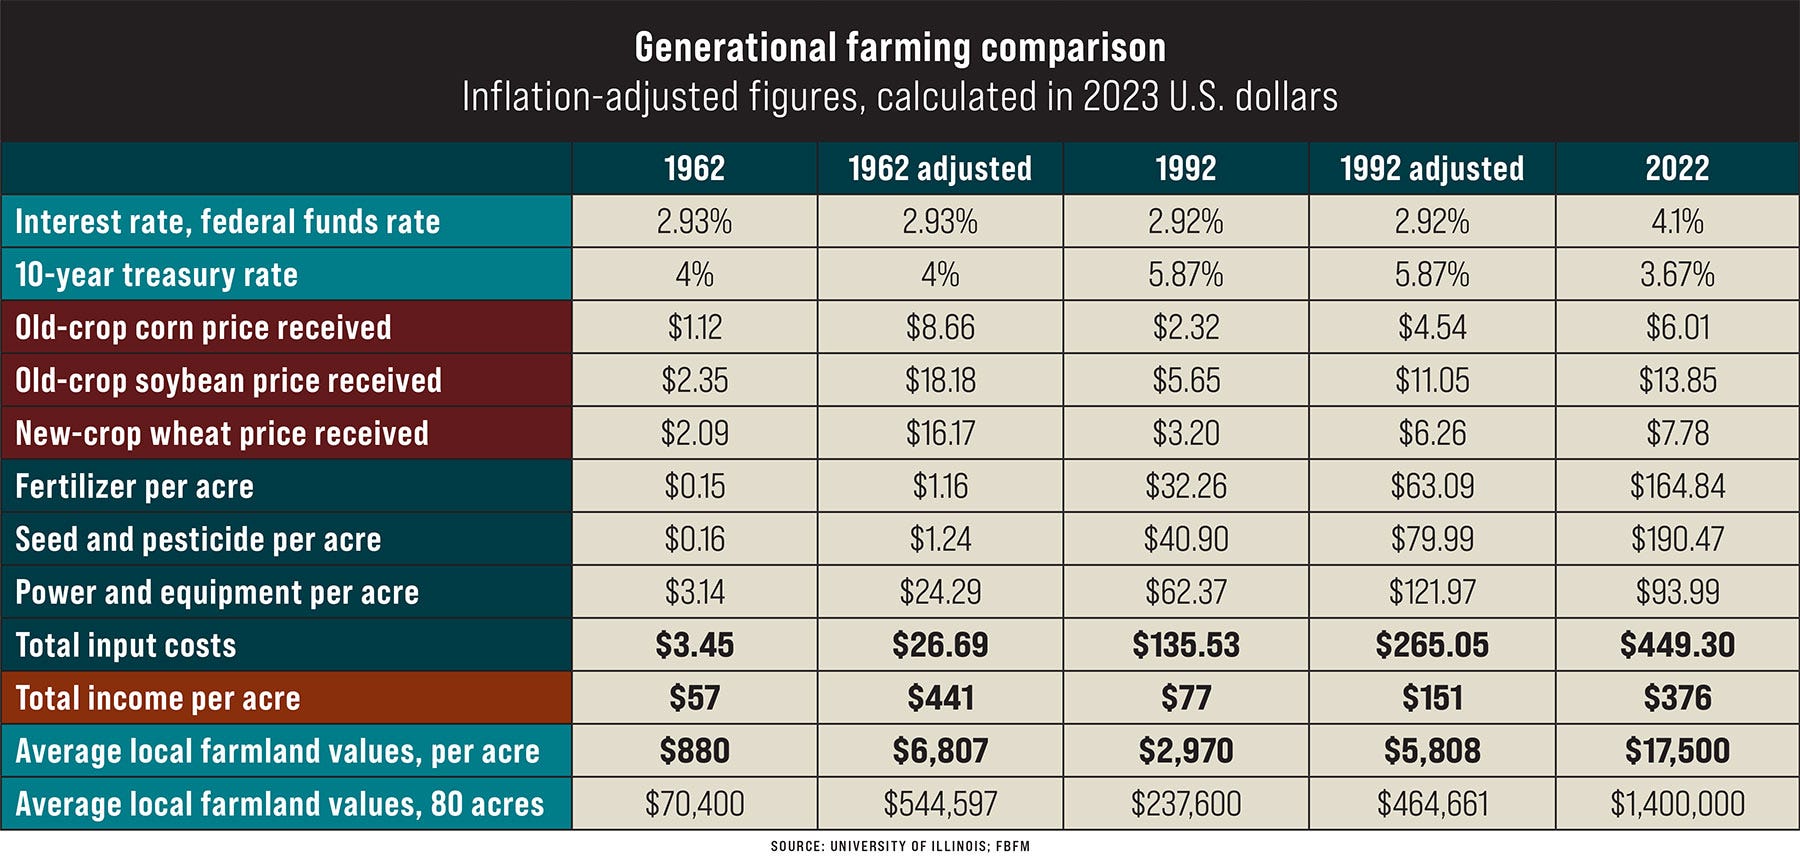 A table comparing generational farming costs in the U.S. in 1962, 1992 and 2022 with 2023 inflation adjusted figures